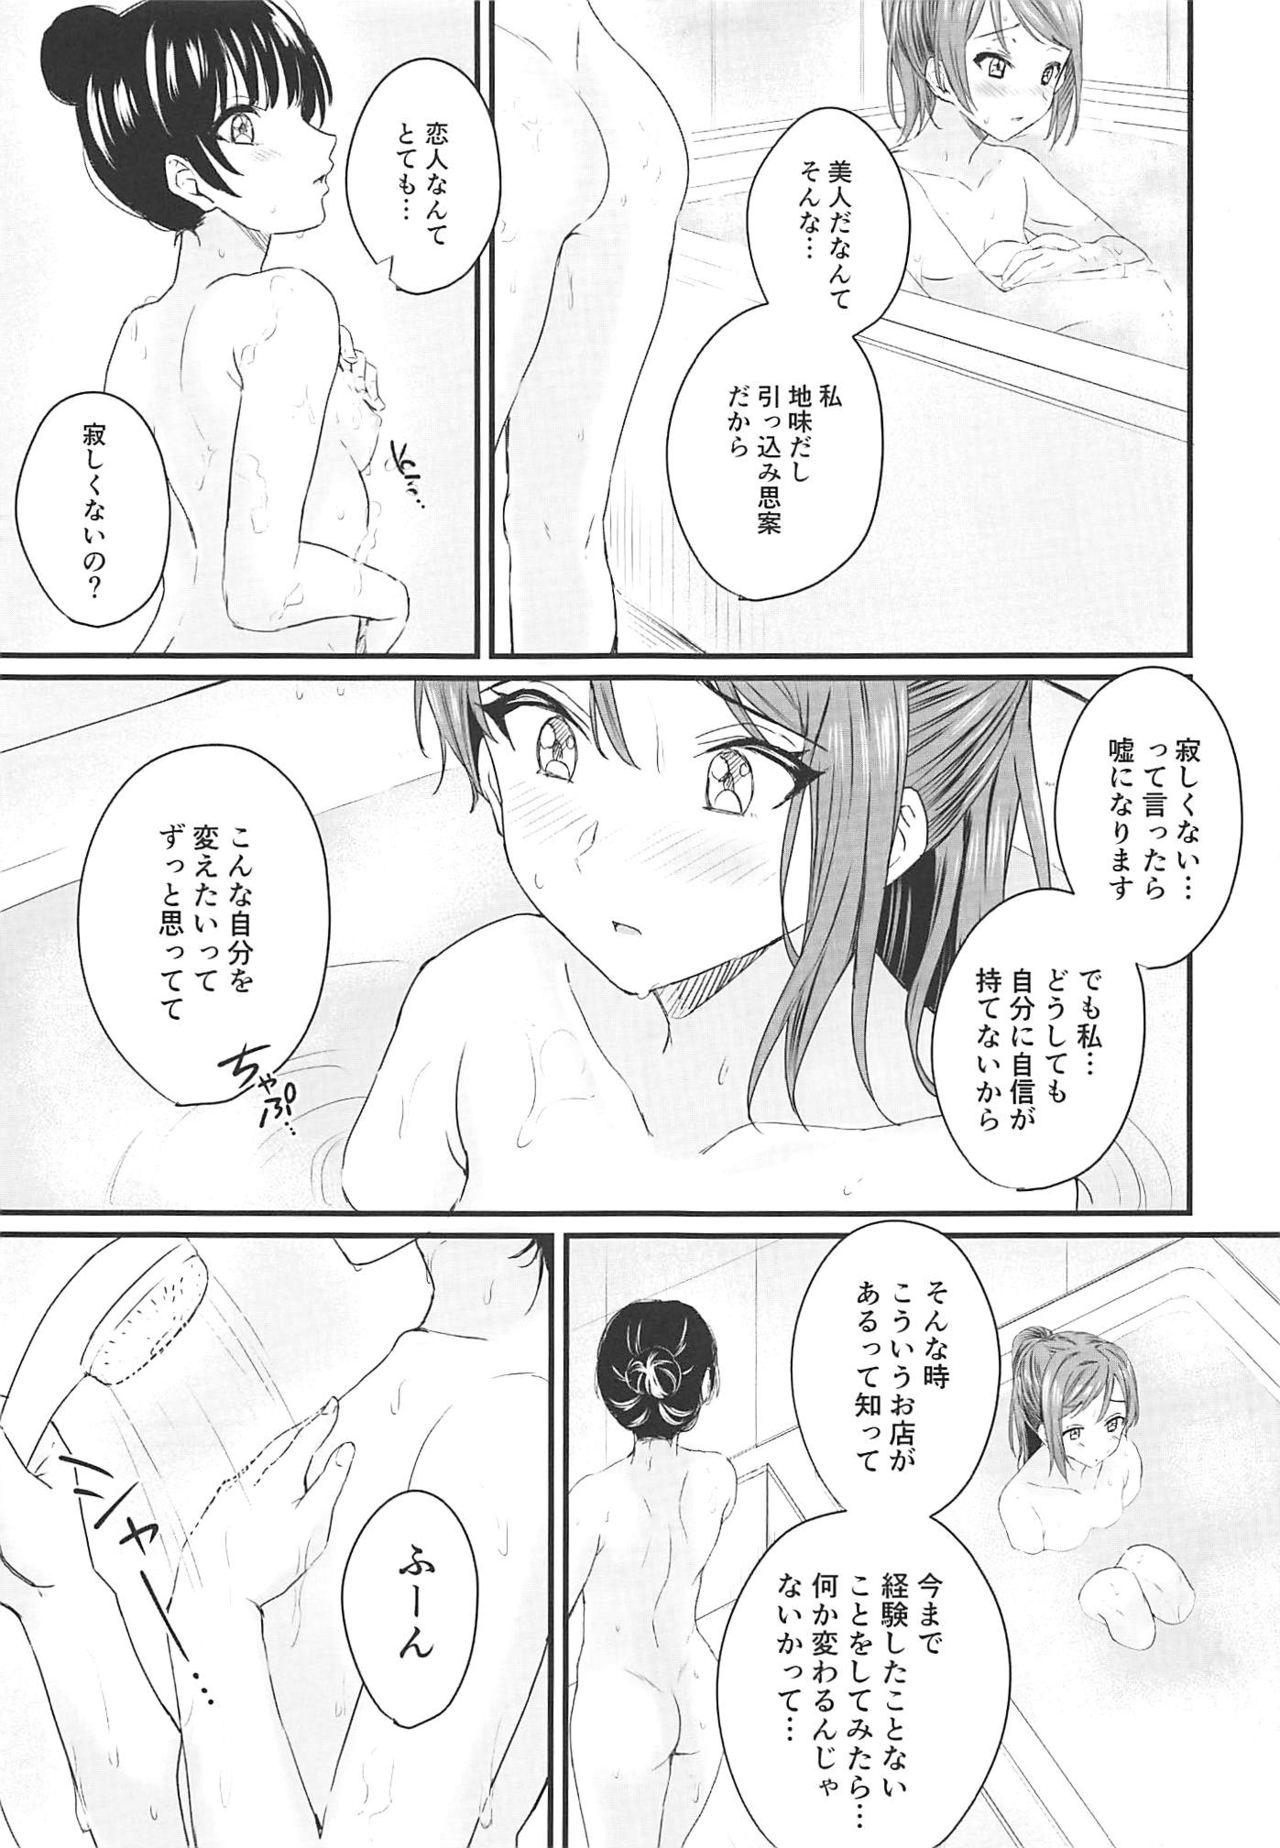 Ball Licking INSTANT LOVE STORY - Love live sunshine Face - Page 6